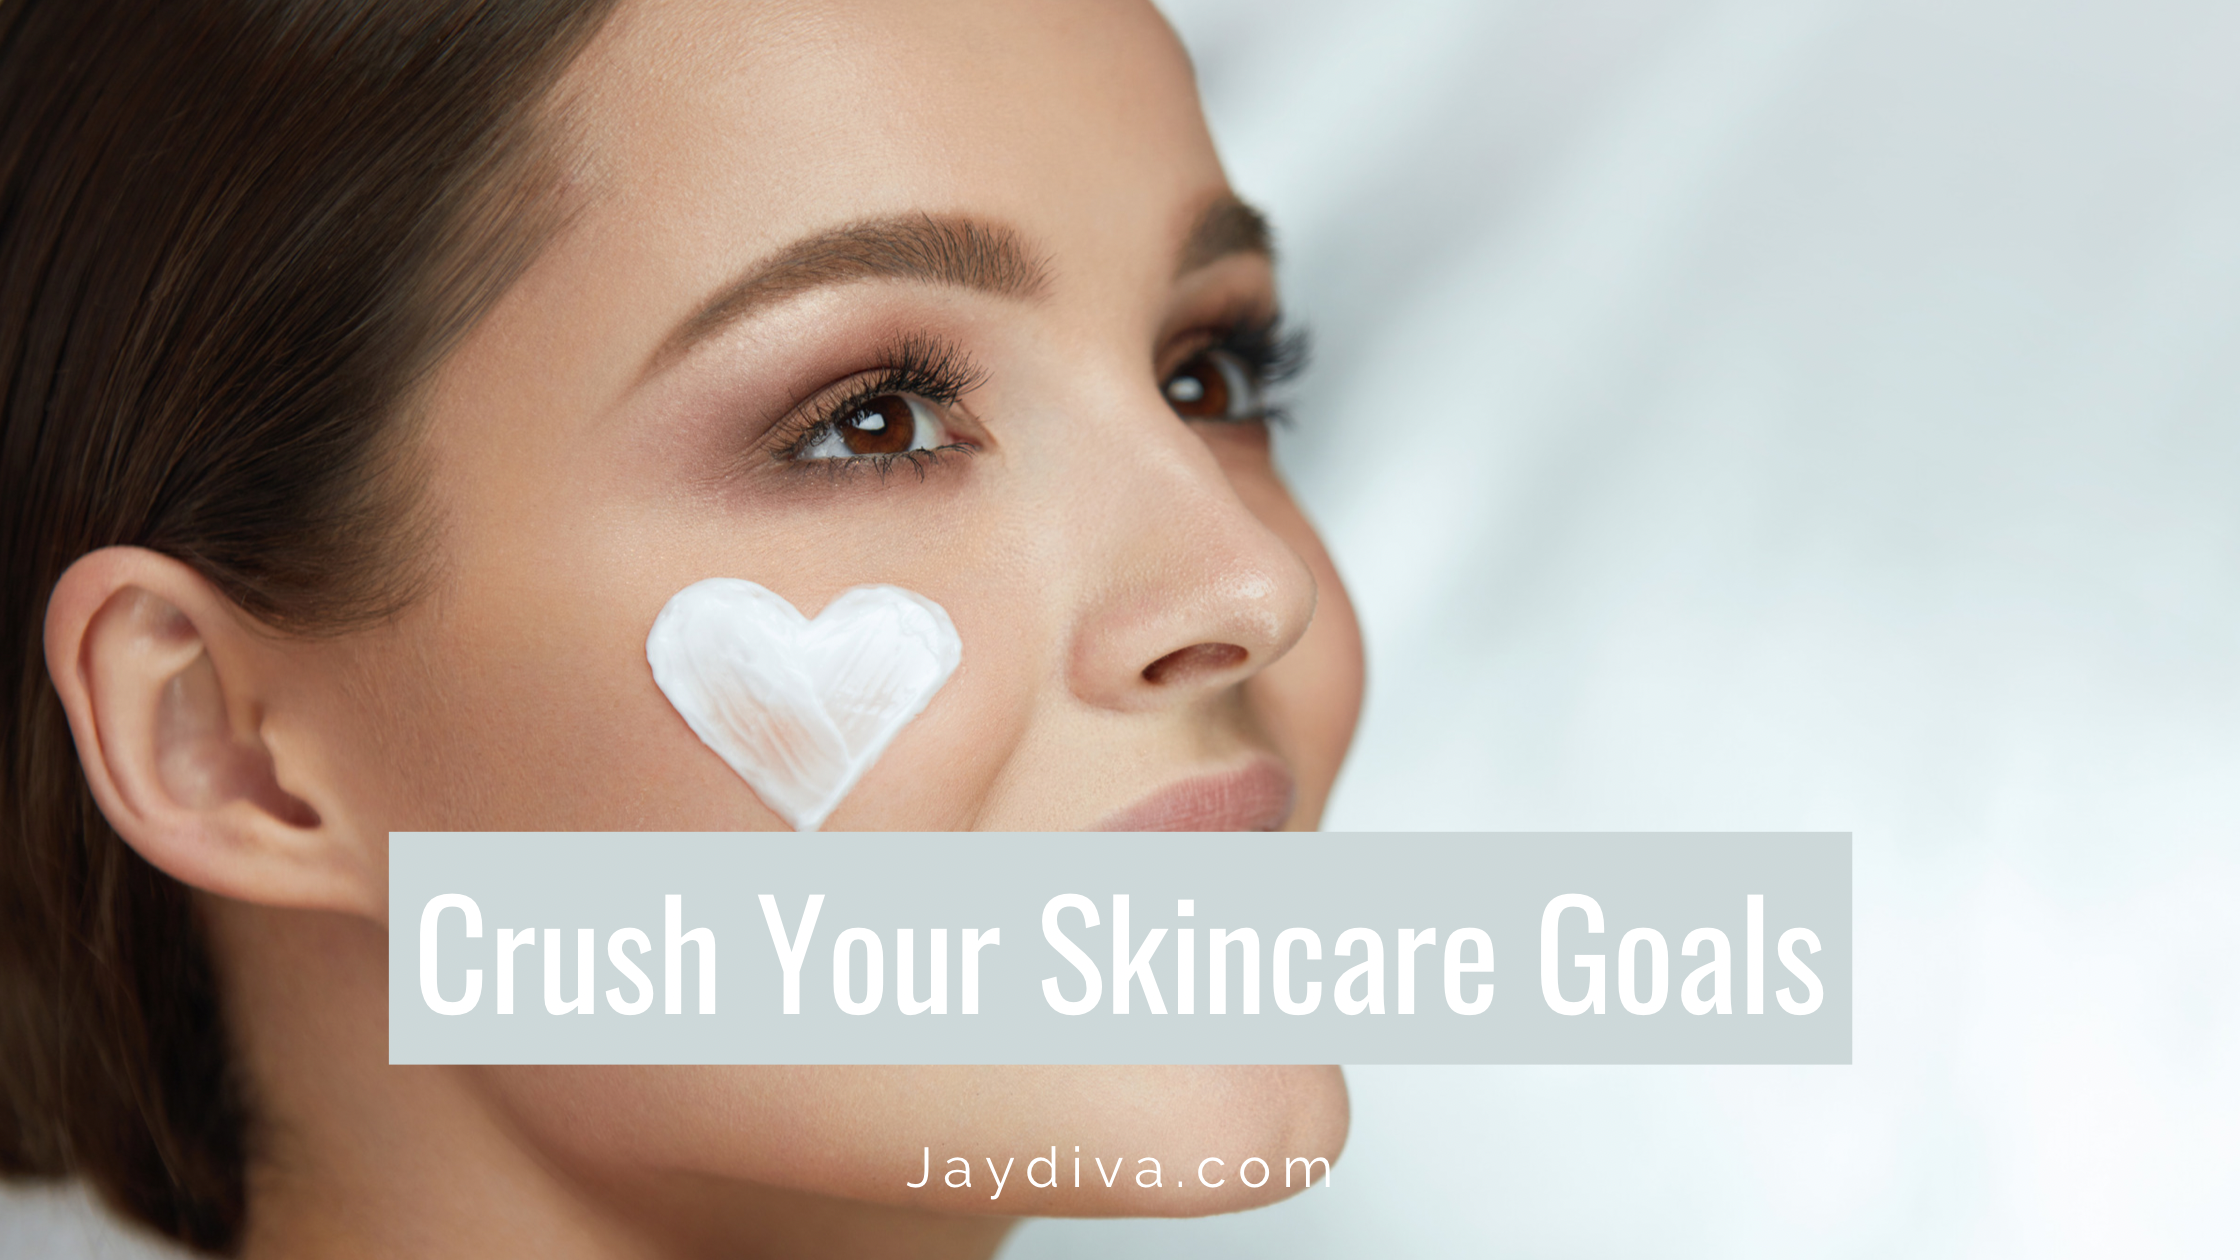 Tips to crush your skincare goals